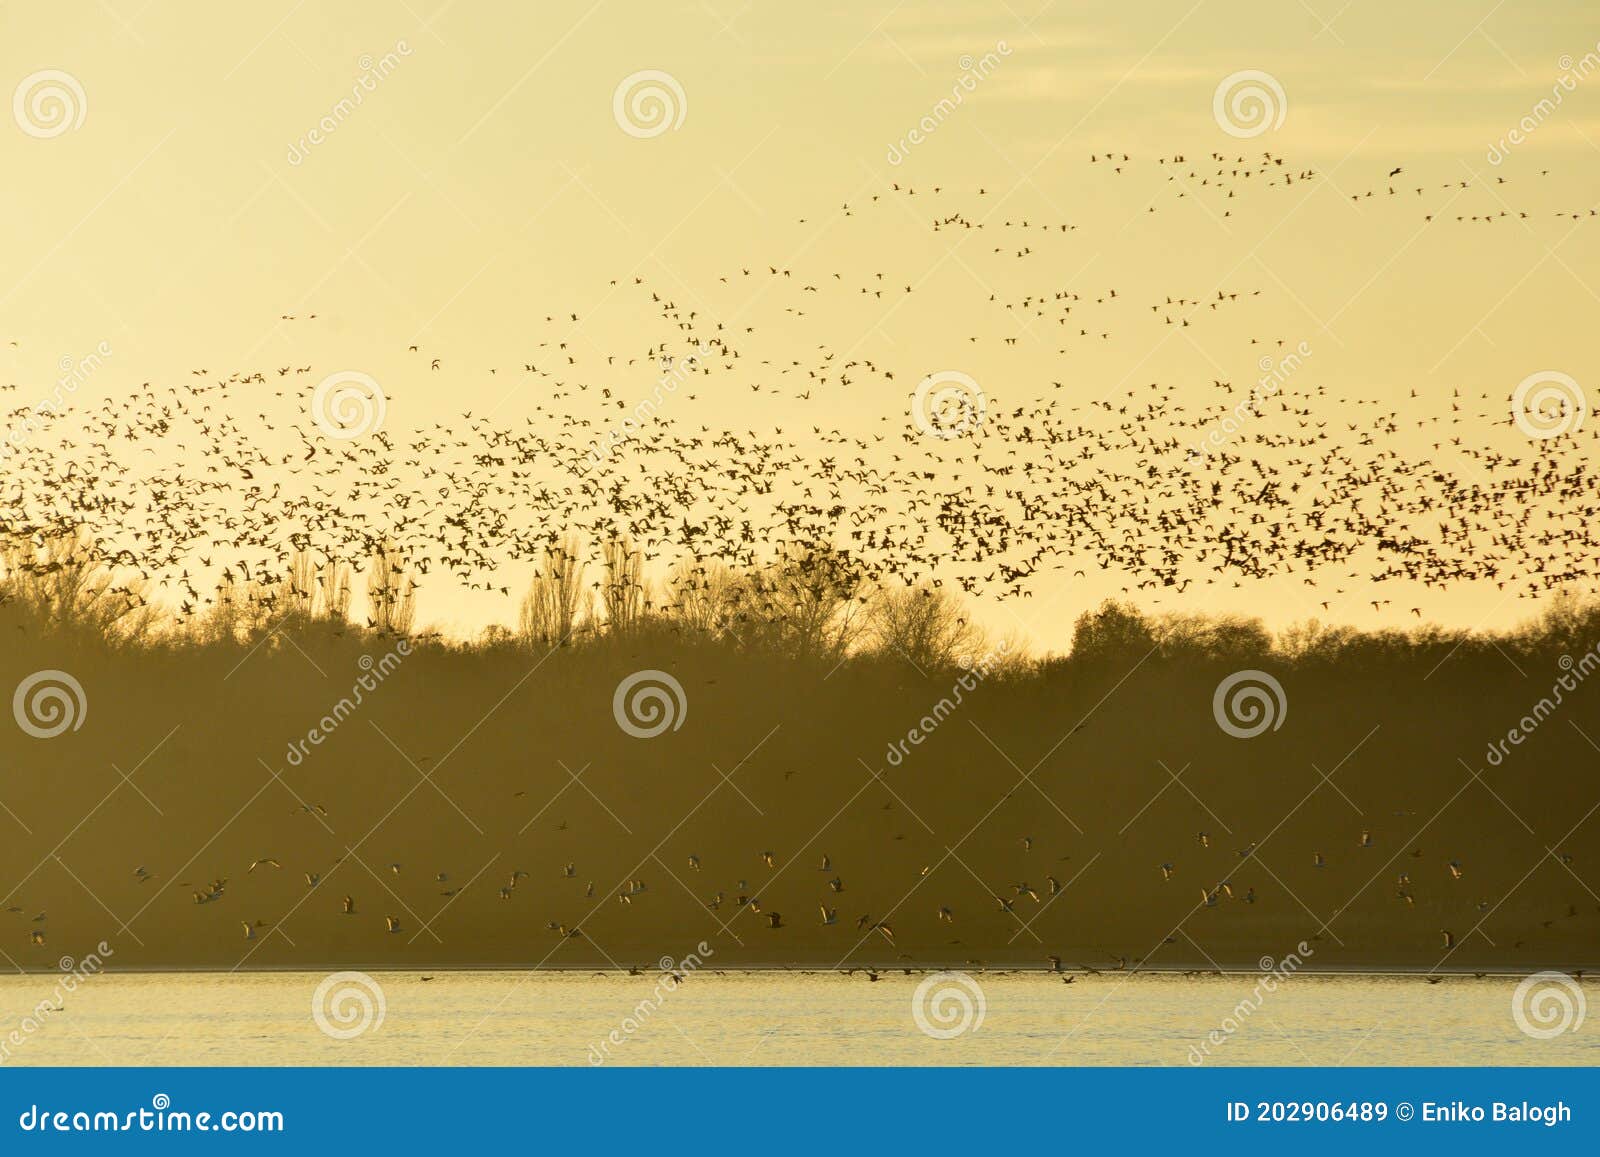 thousands of wild geese overwinter on the lake